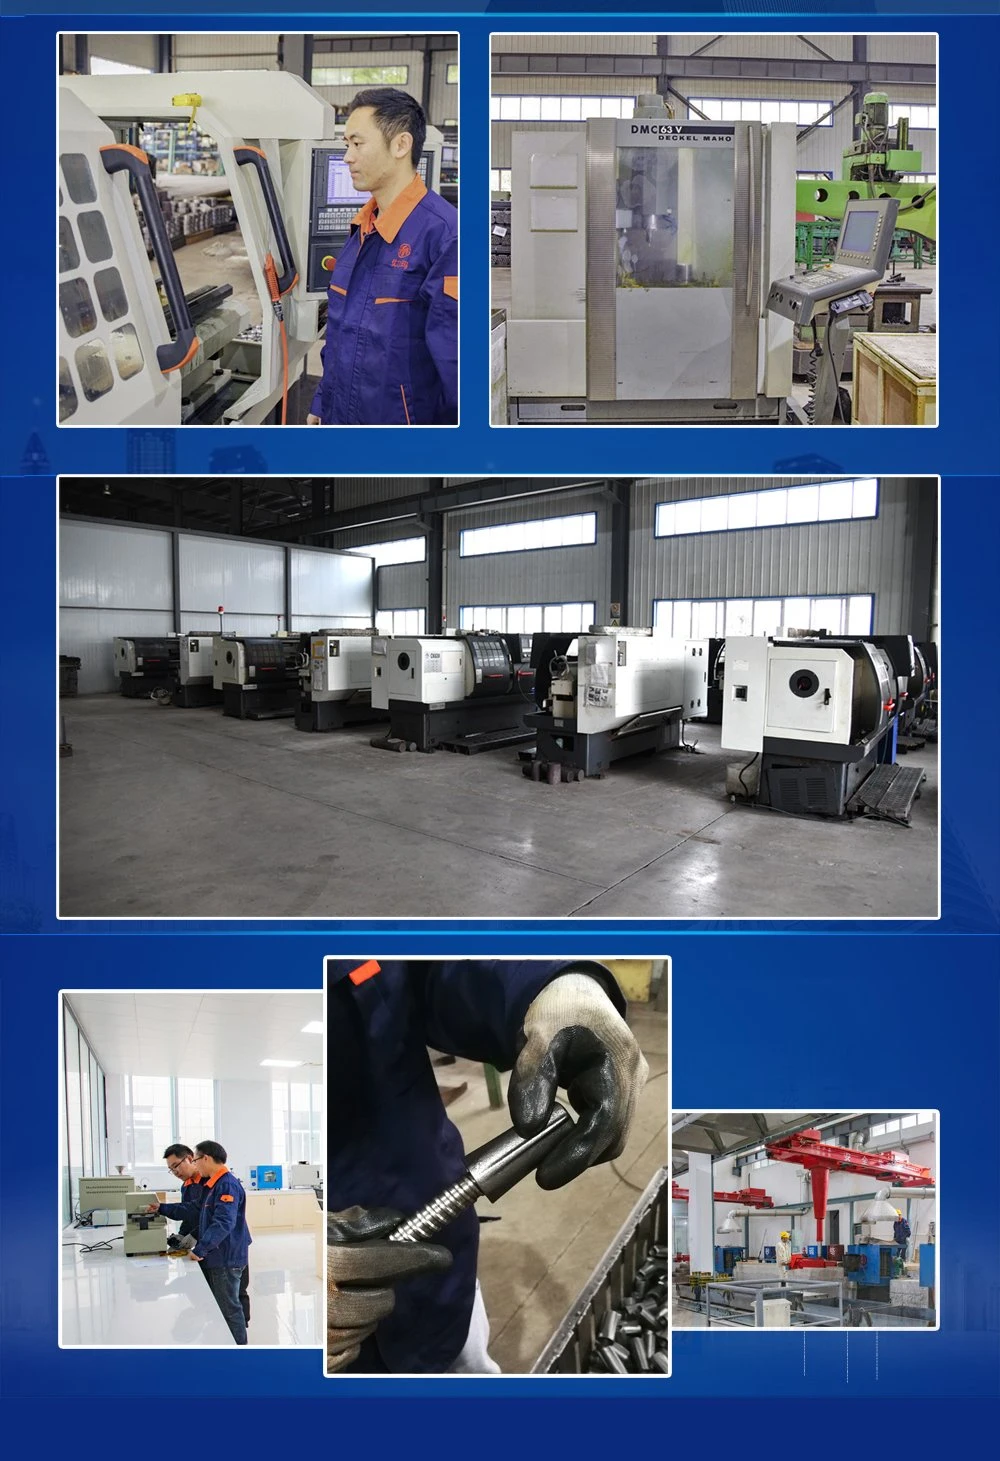 Machining, Forging, Pressing, Construction, Equipment, Accessories, Component, Steel, Tools, Power Fitting